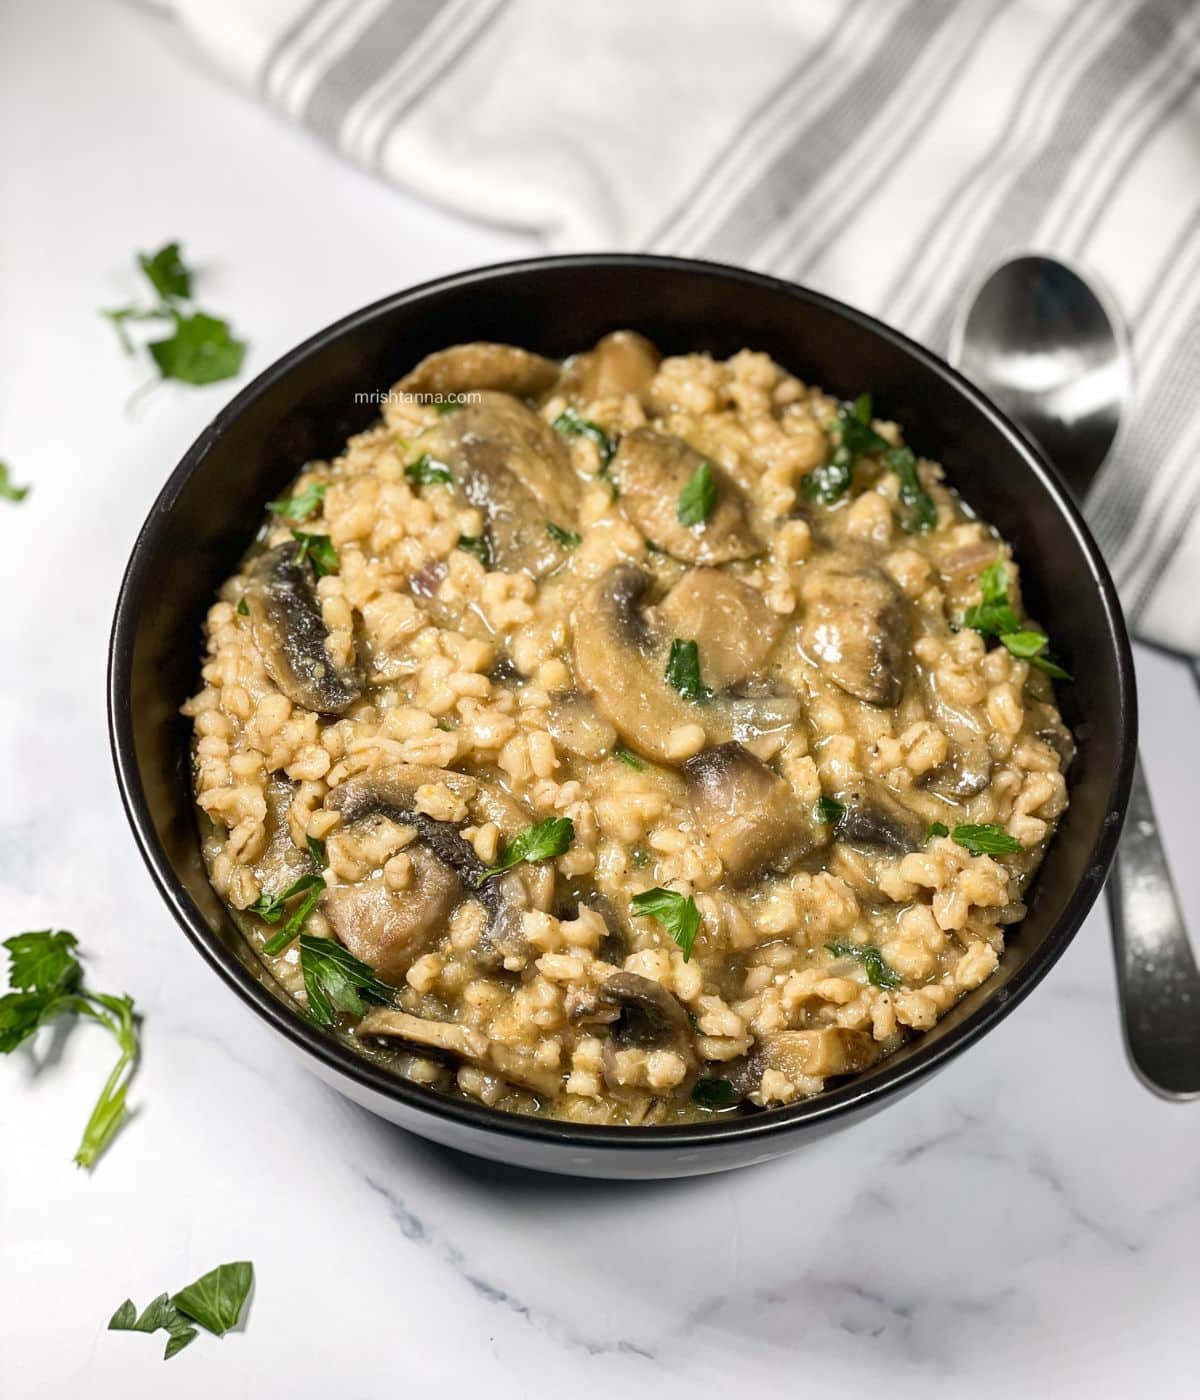 Instant pot barley mushroom risotto is in the bowl.